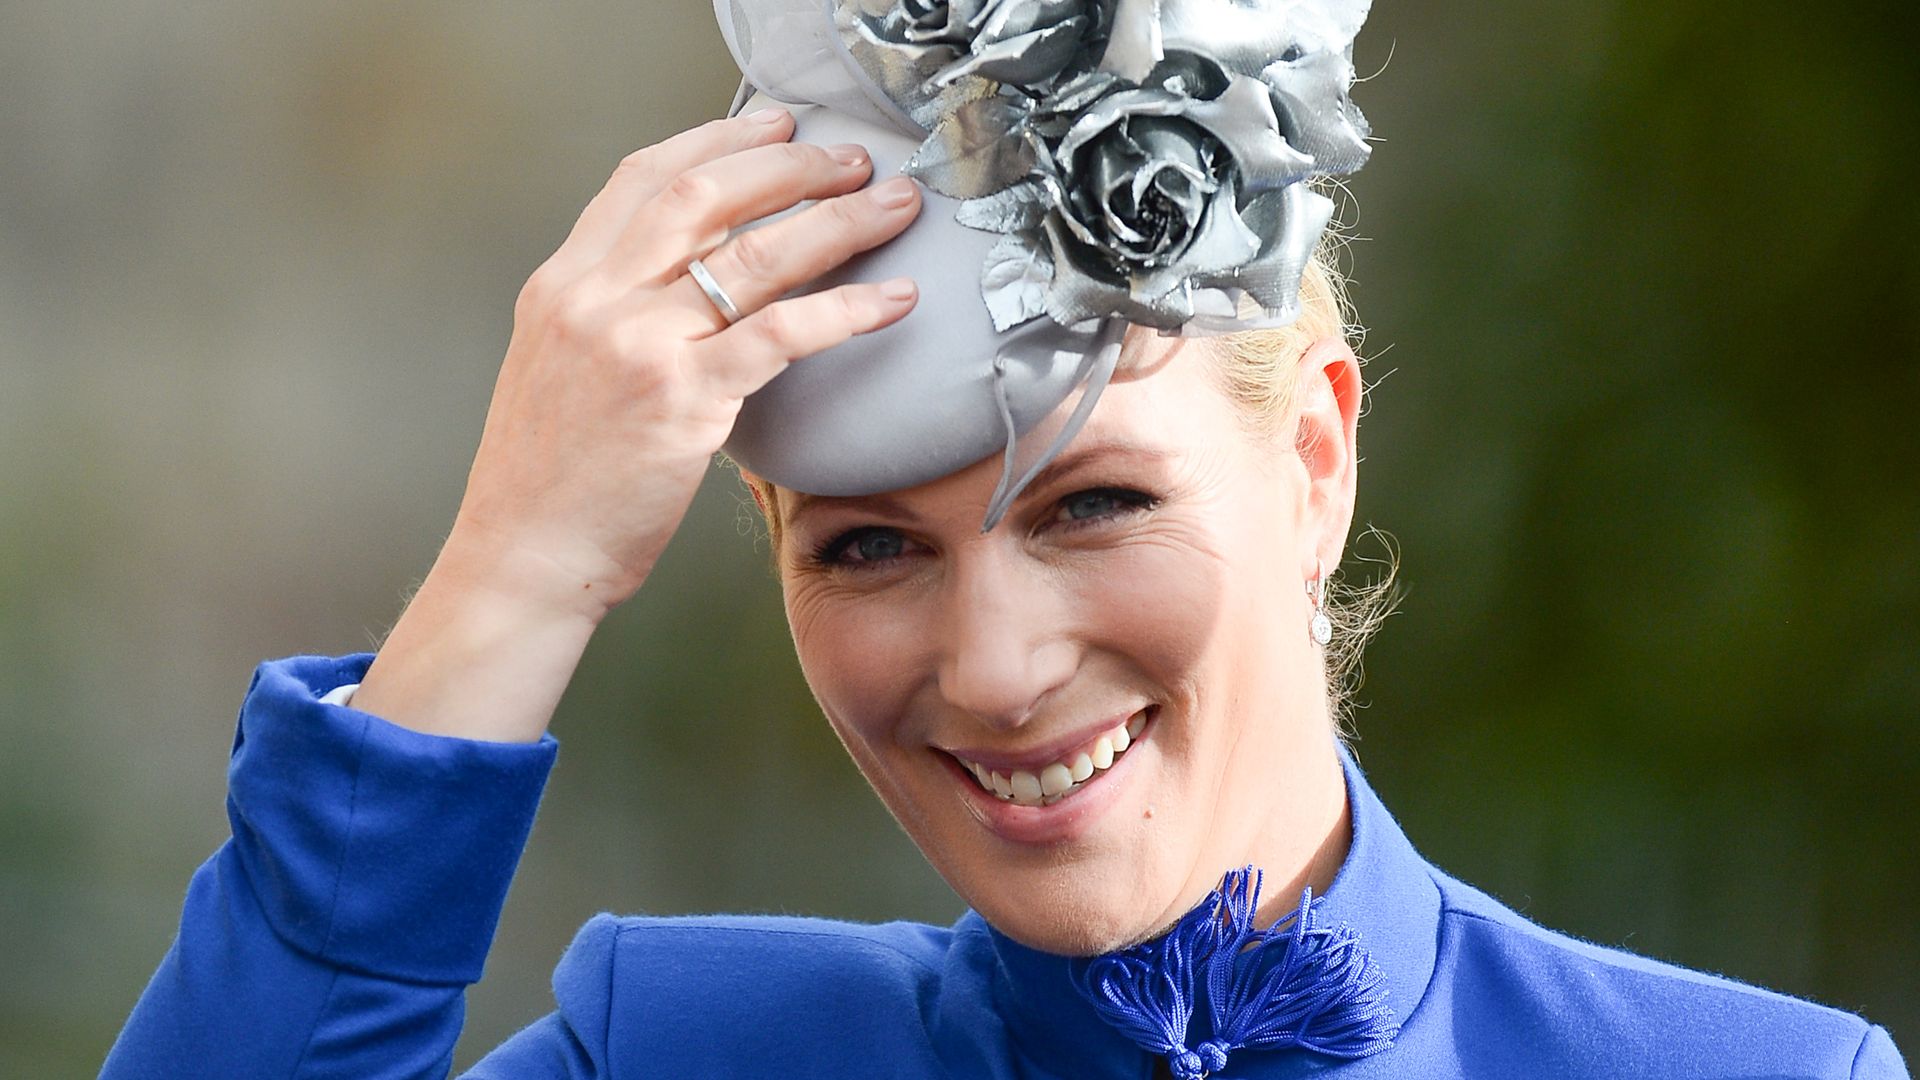 Zara Tindall attends the wedding of Princess Eugenie of York and Jack Brooksbank at St George's Chapel in Windsor Castle on October 12, 2018 in Windsor, England. 